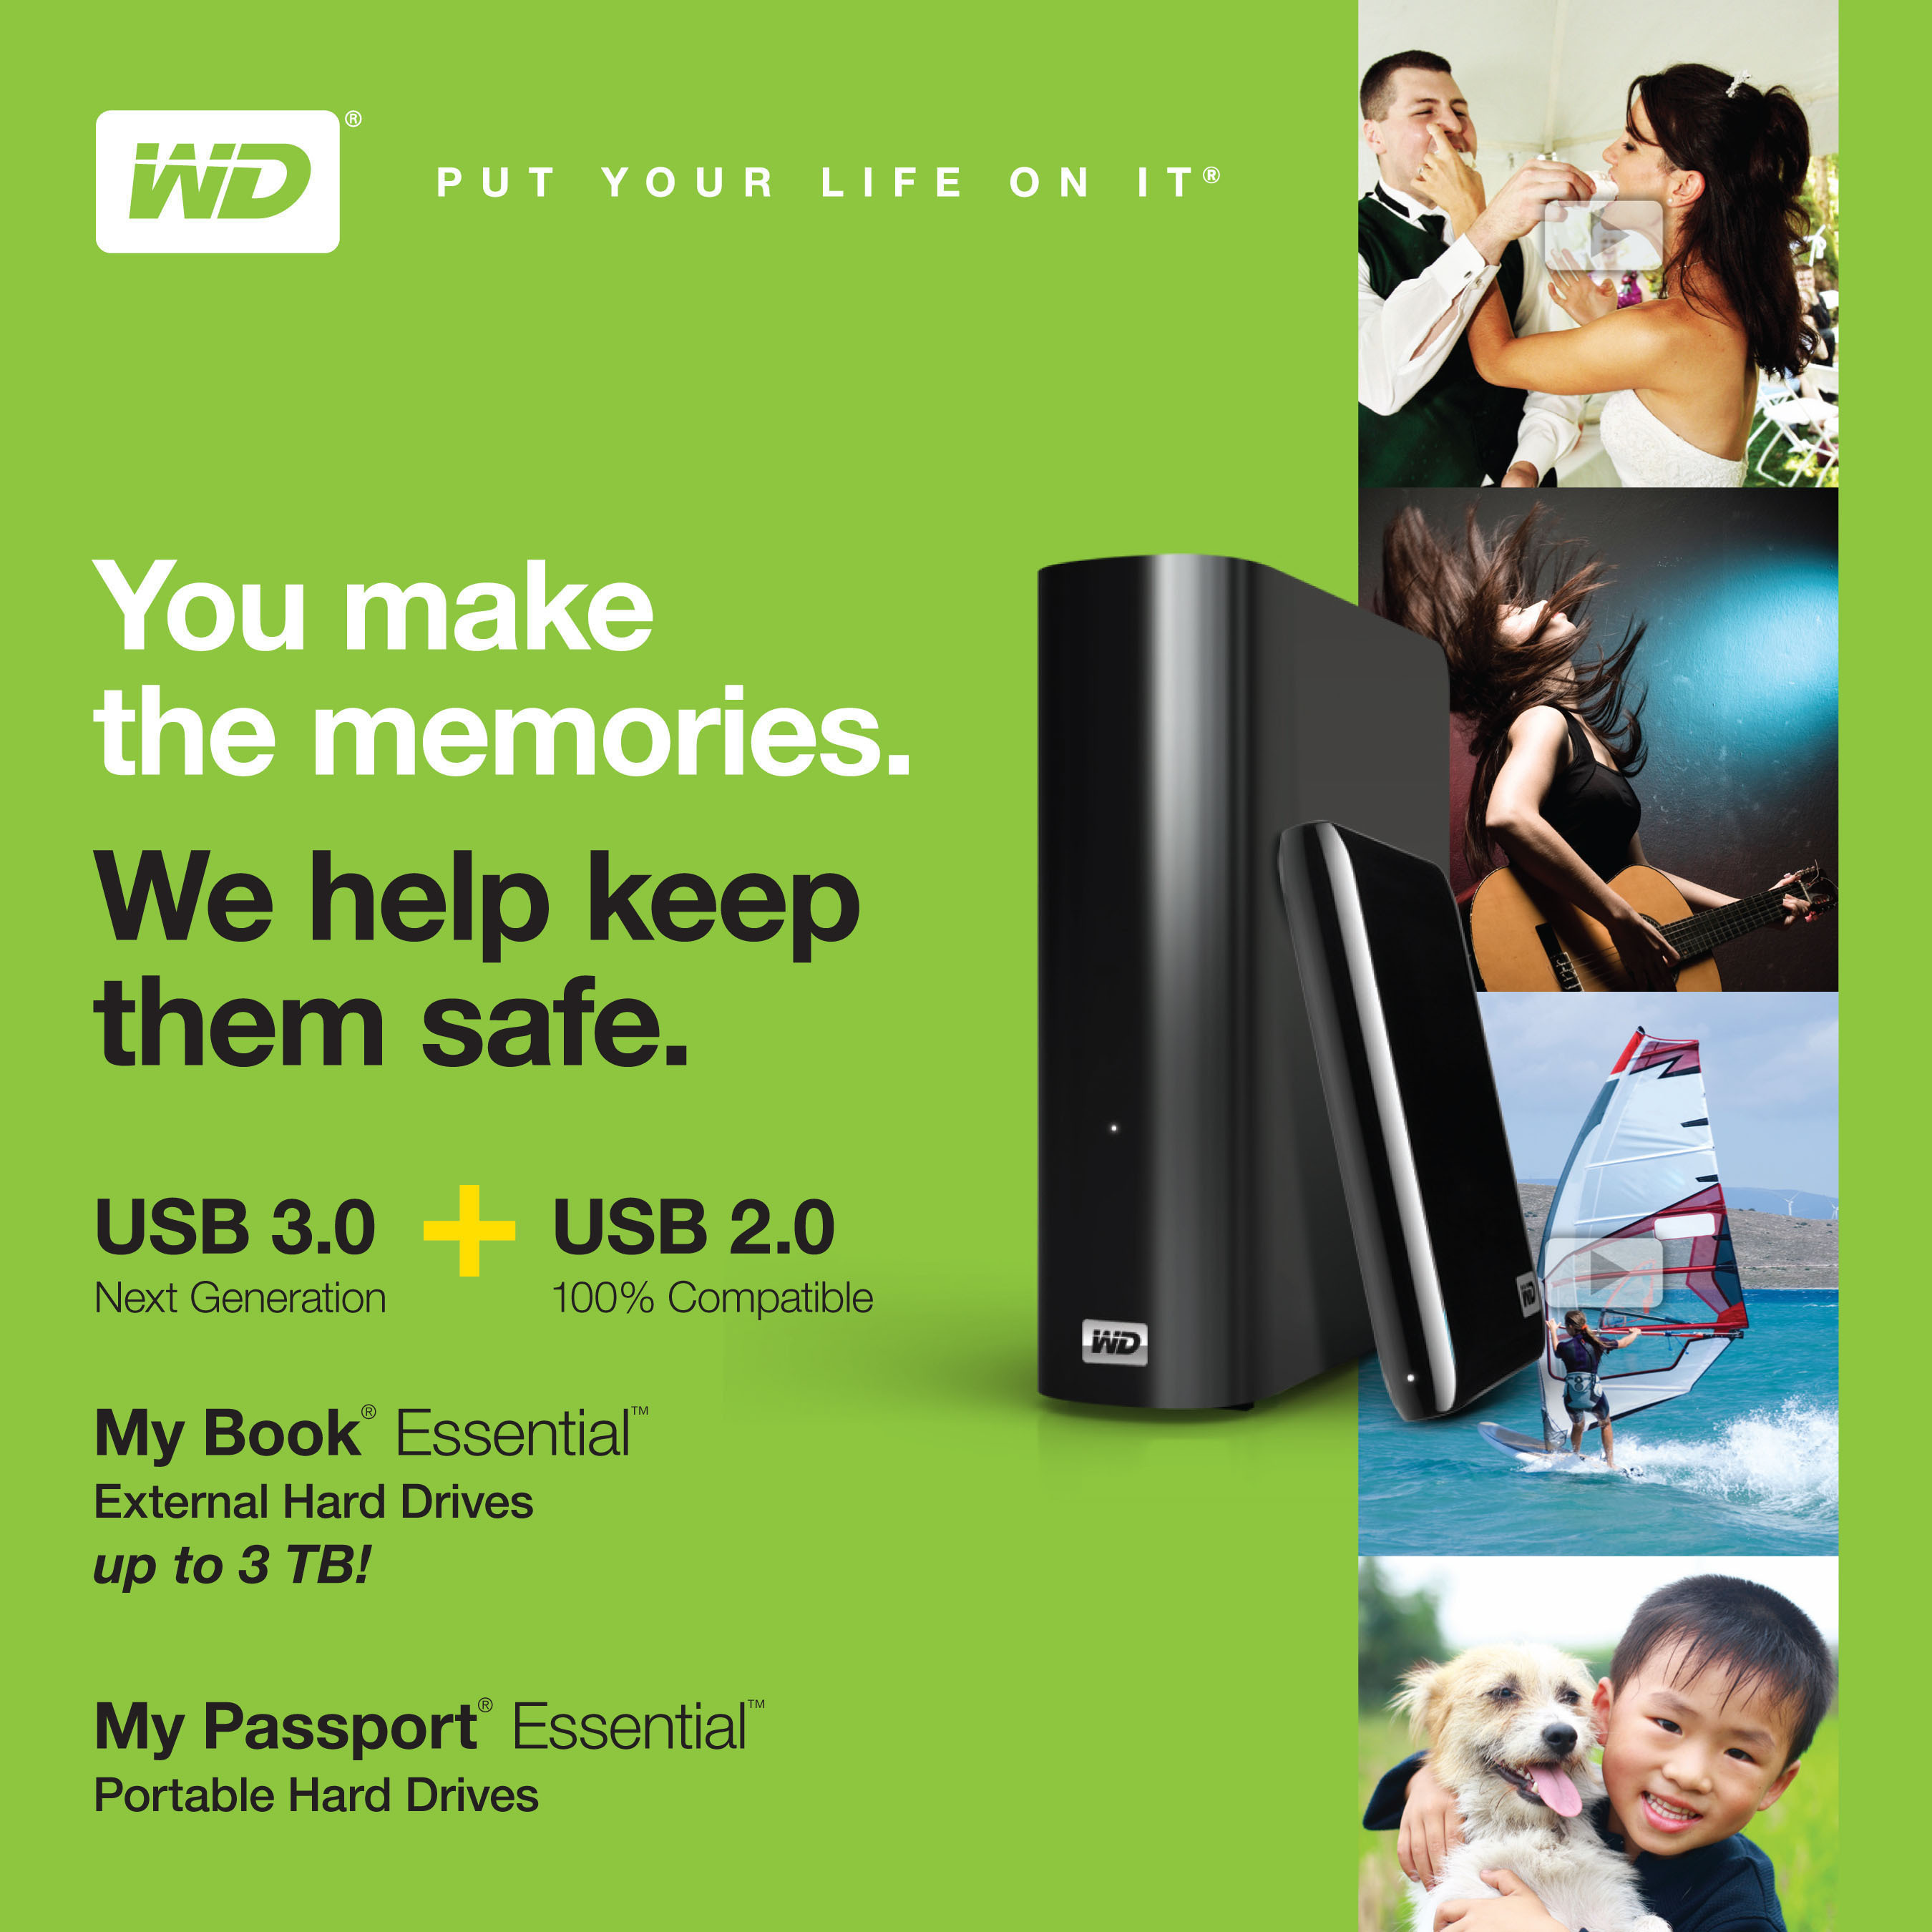 WD® Delivers USB 3.0 and 3 Terabytes With Its New External Hard